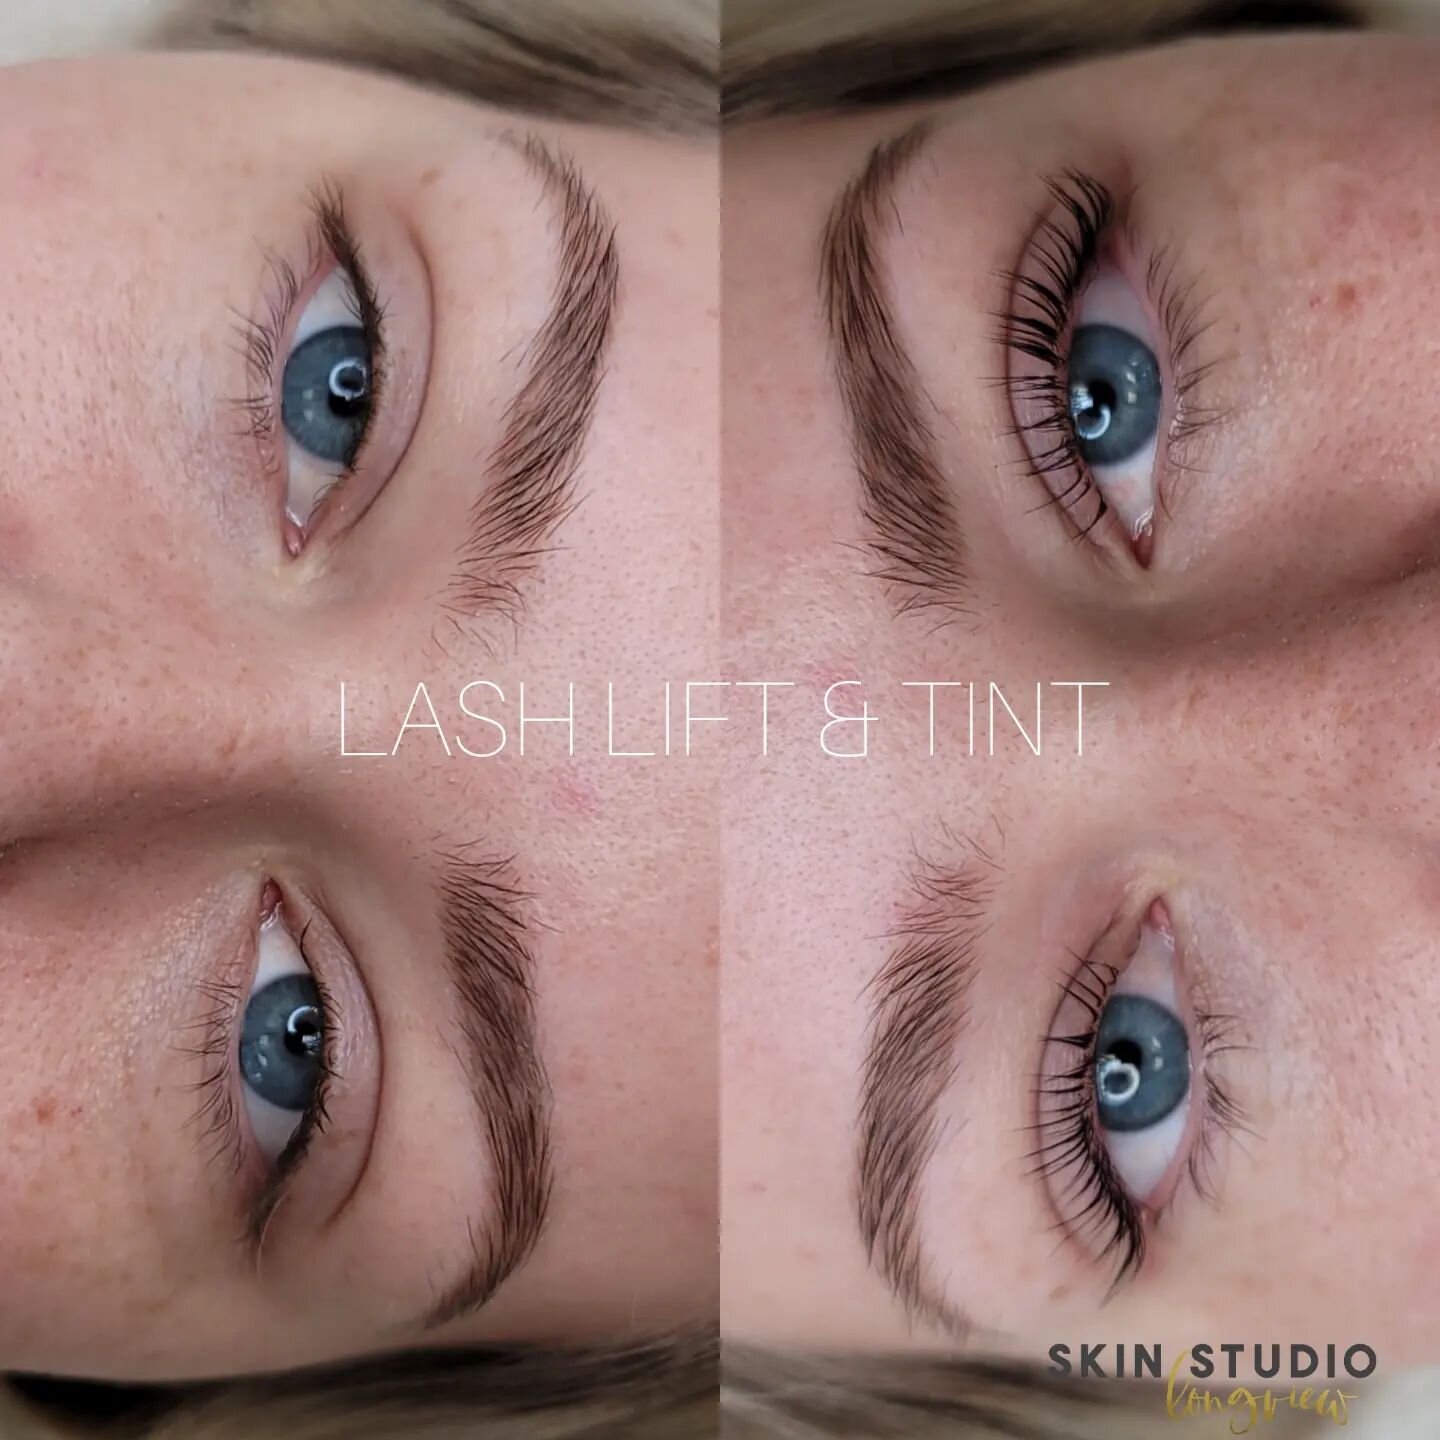 We did a lash lift &amp; tint. Her brows are 4 weeks healed after her first session. I cannot wait to see them after her touchup!! 💕
 𝑮𝒊𝒇𝒕 𝒄𝒂𝒓𝒅𝒔 𝒂𝒗𝒂𝒊𝒍𝒂𝒃𝒍𝒆 𝒐𝒏𝒍𝒊𝒏𝒆
 𝑩𝒐𝒐𝒌𝒊𝒏𝒈, 𝑭𝑨𝑸𝒔, 𝒎𝒐𝒓𝒆 𝒊𝒏𝒇𝒐 👇
www.skinstudiol